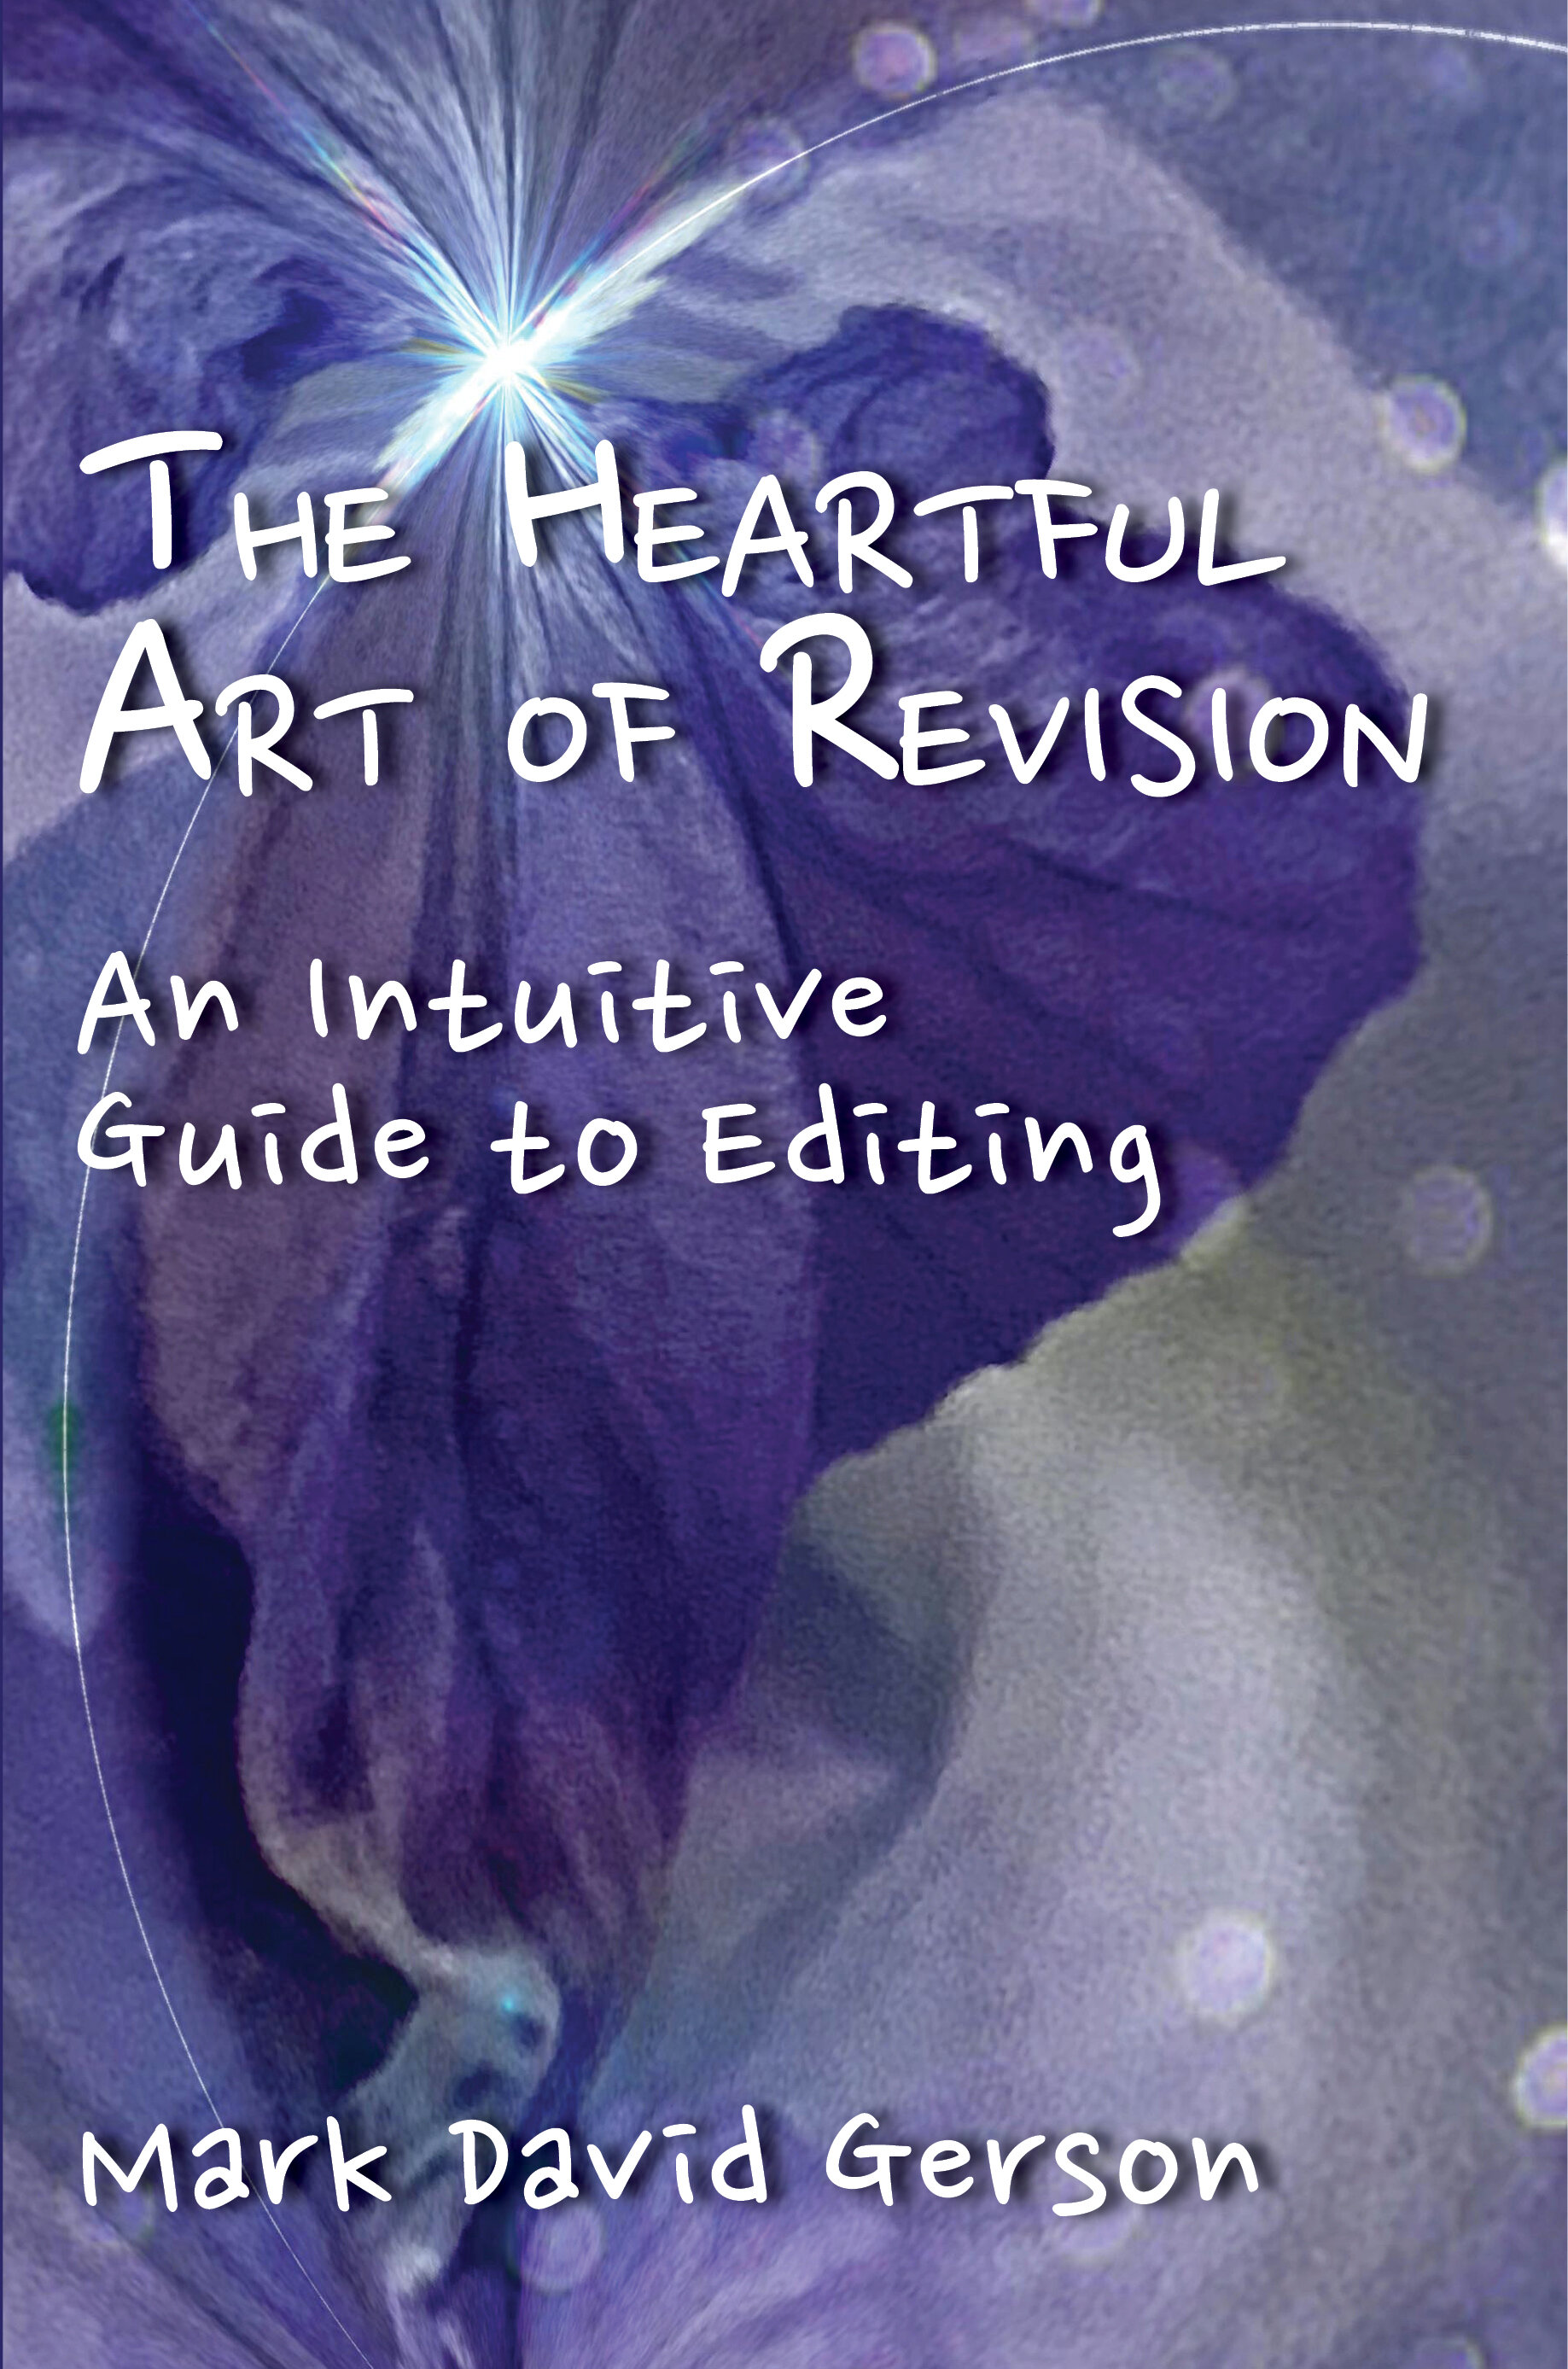 Revision cover - new color - testimonial - KDP front copy.jpg